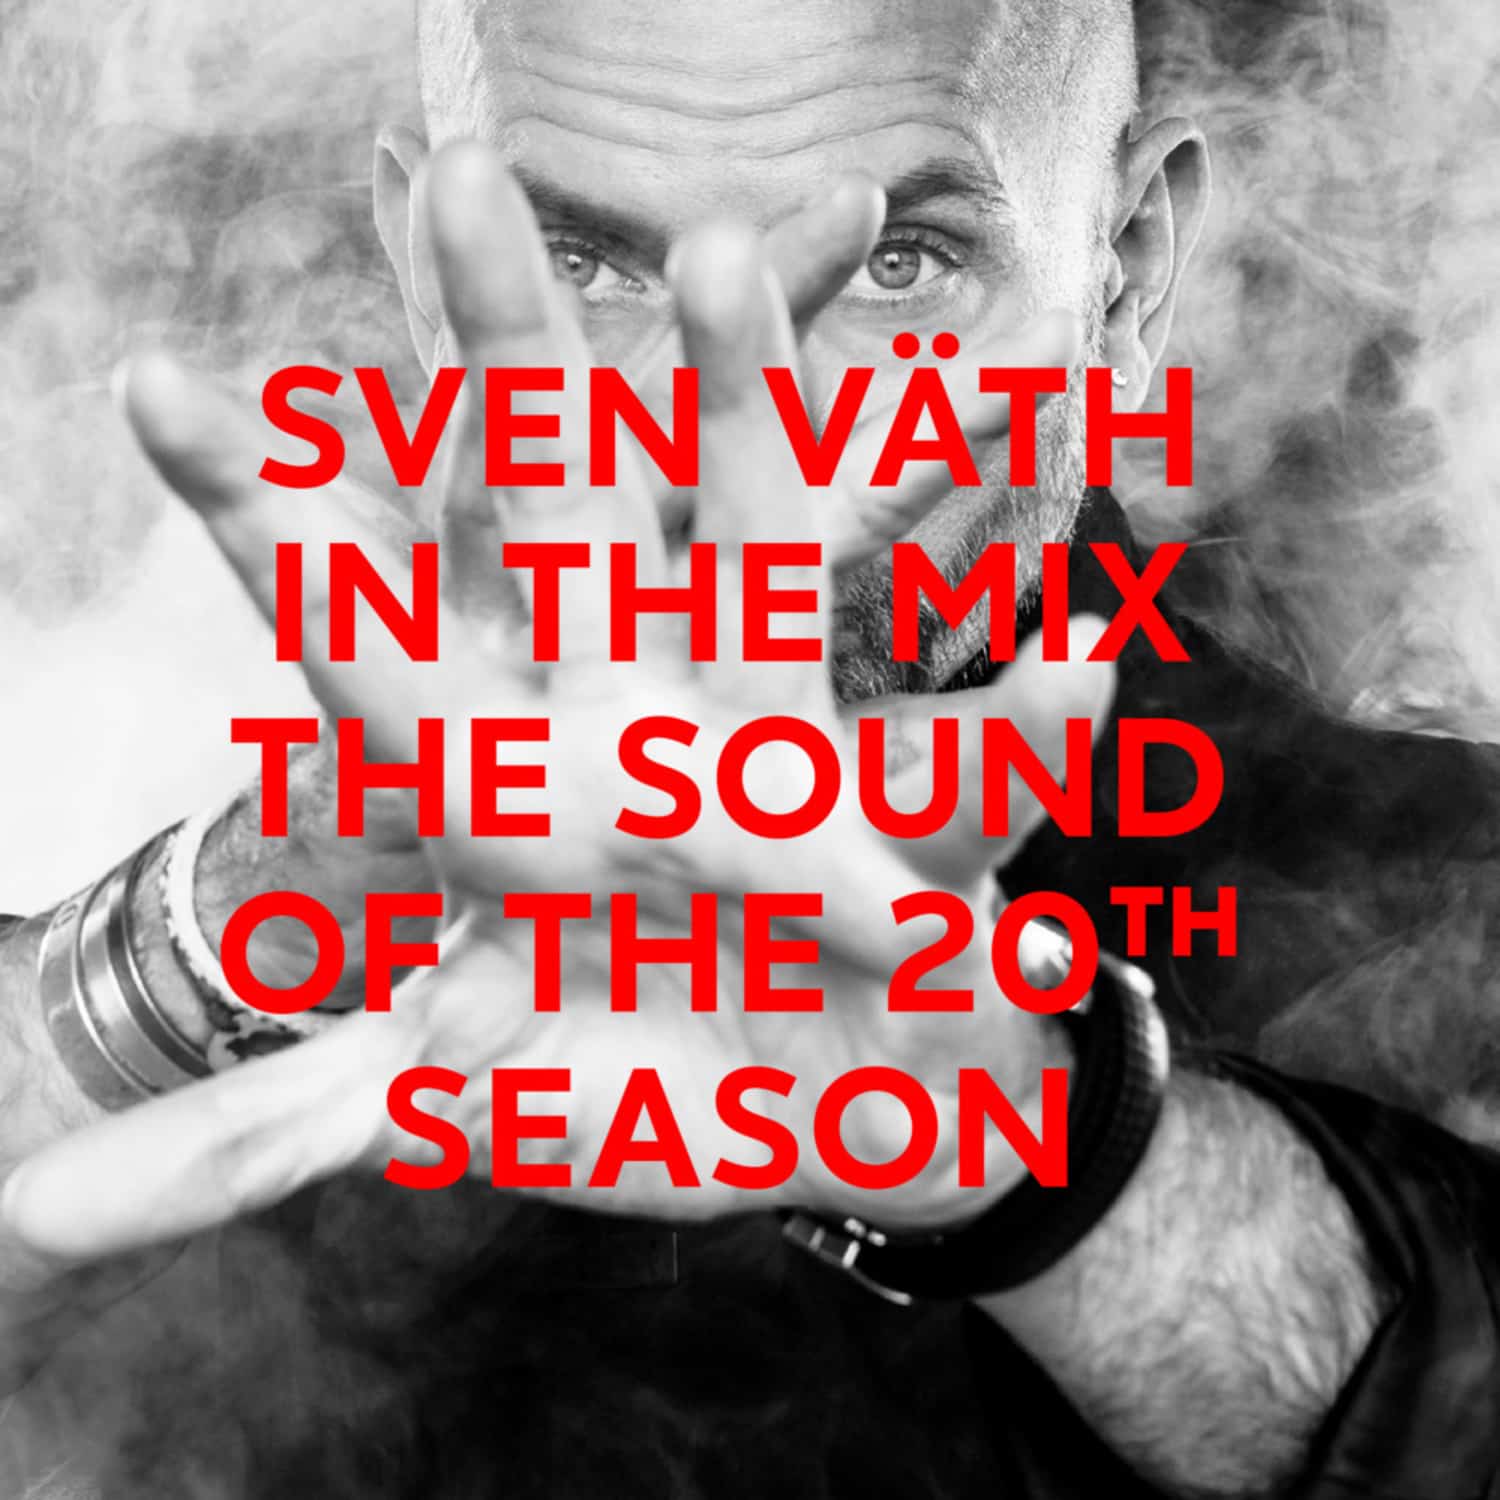 Sven Vth In The Mix - THE SOUND OF THE 20TH SEASON 